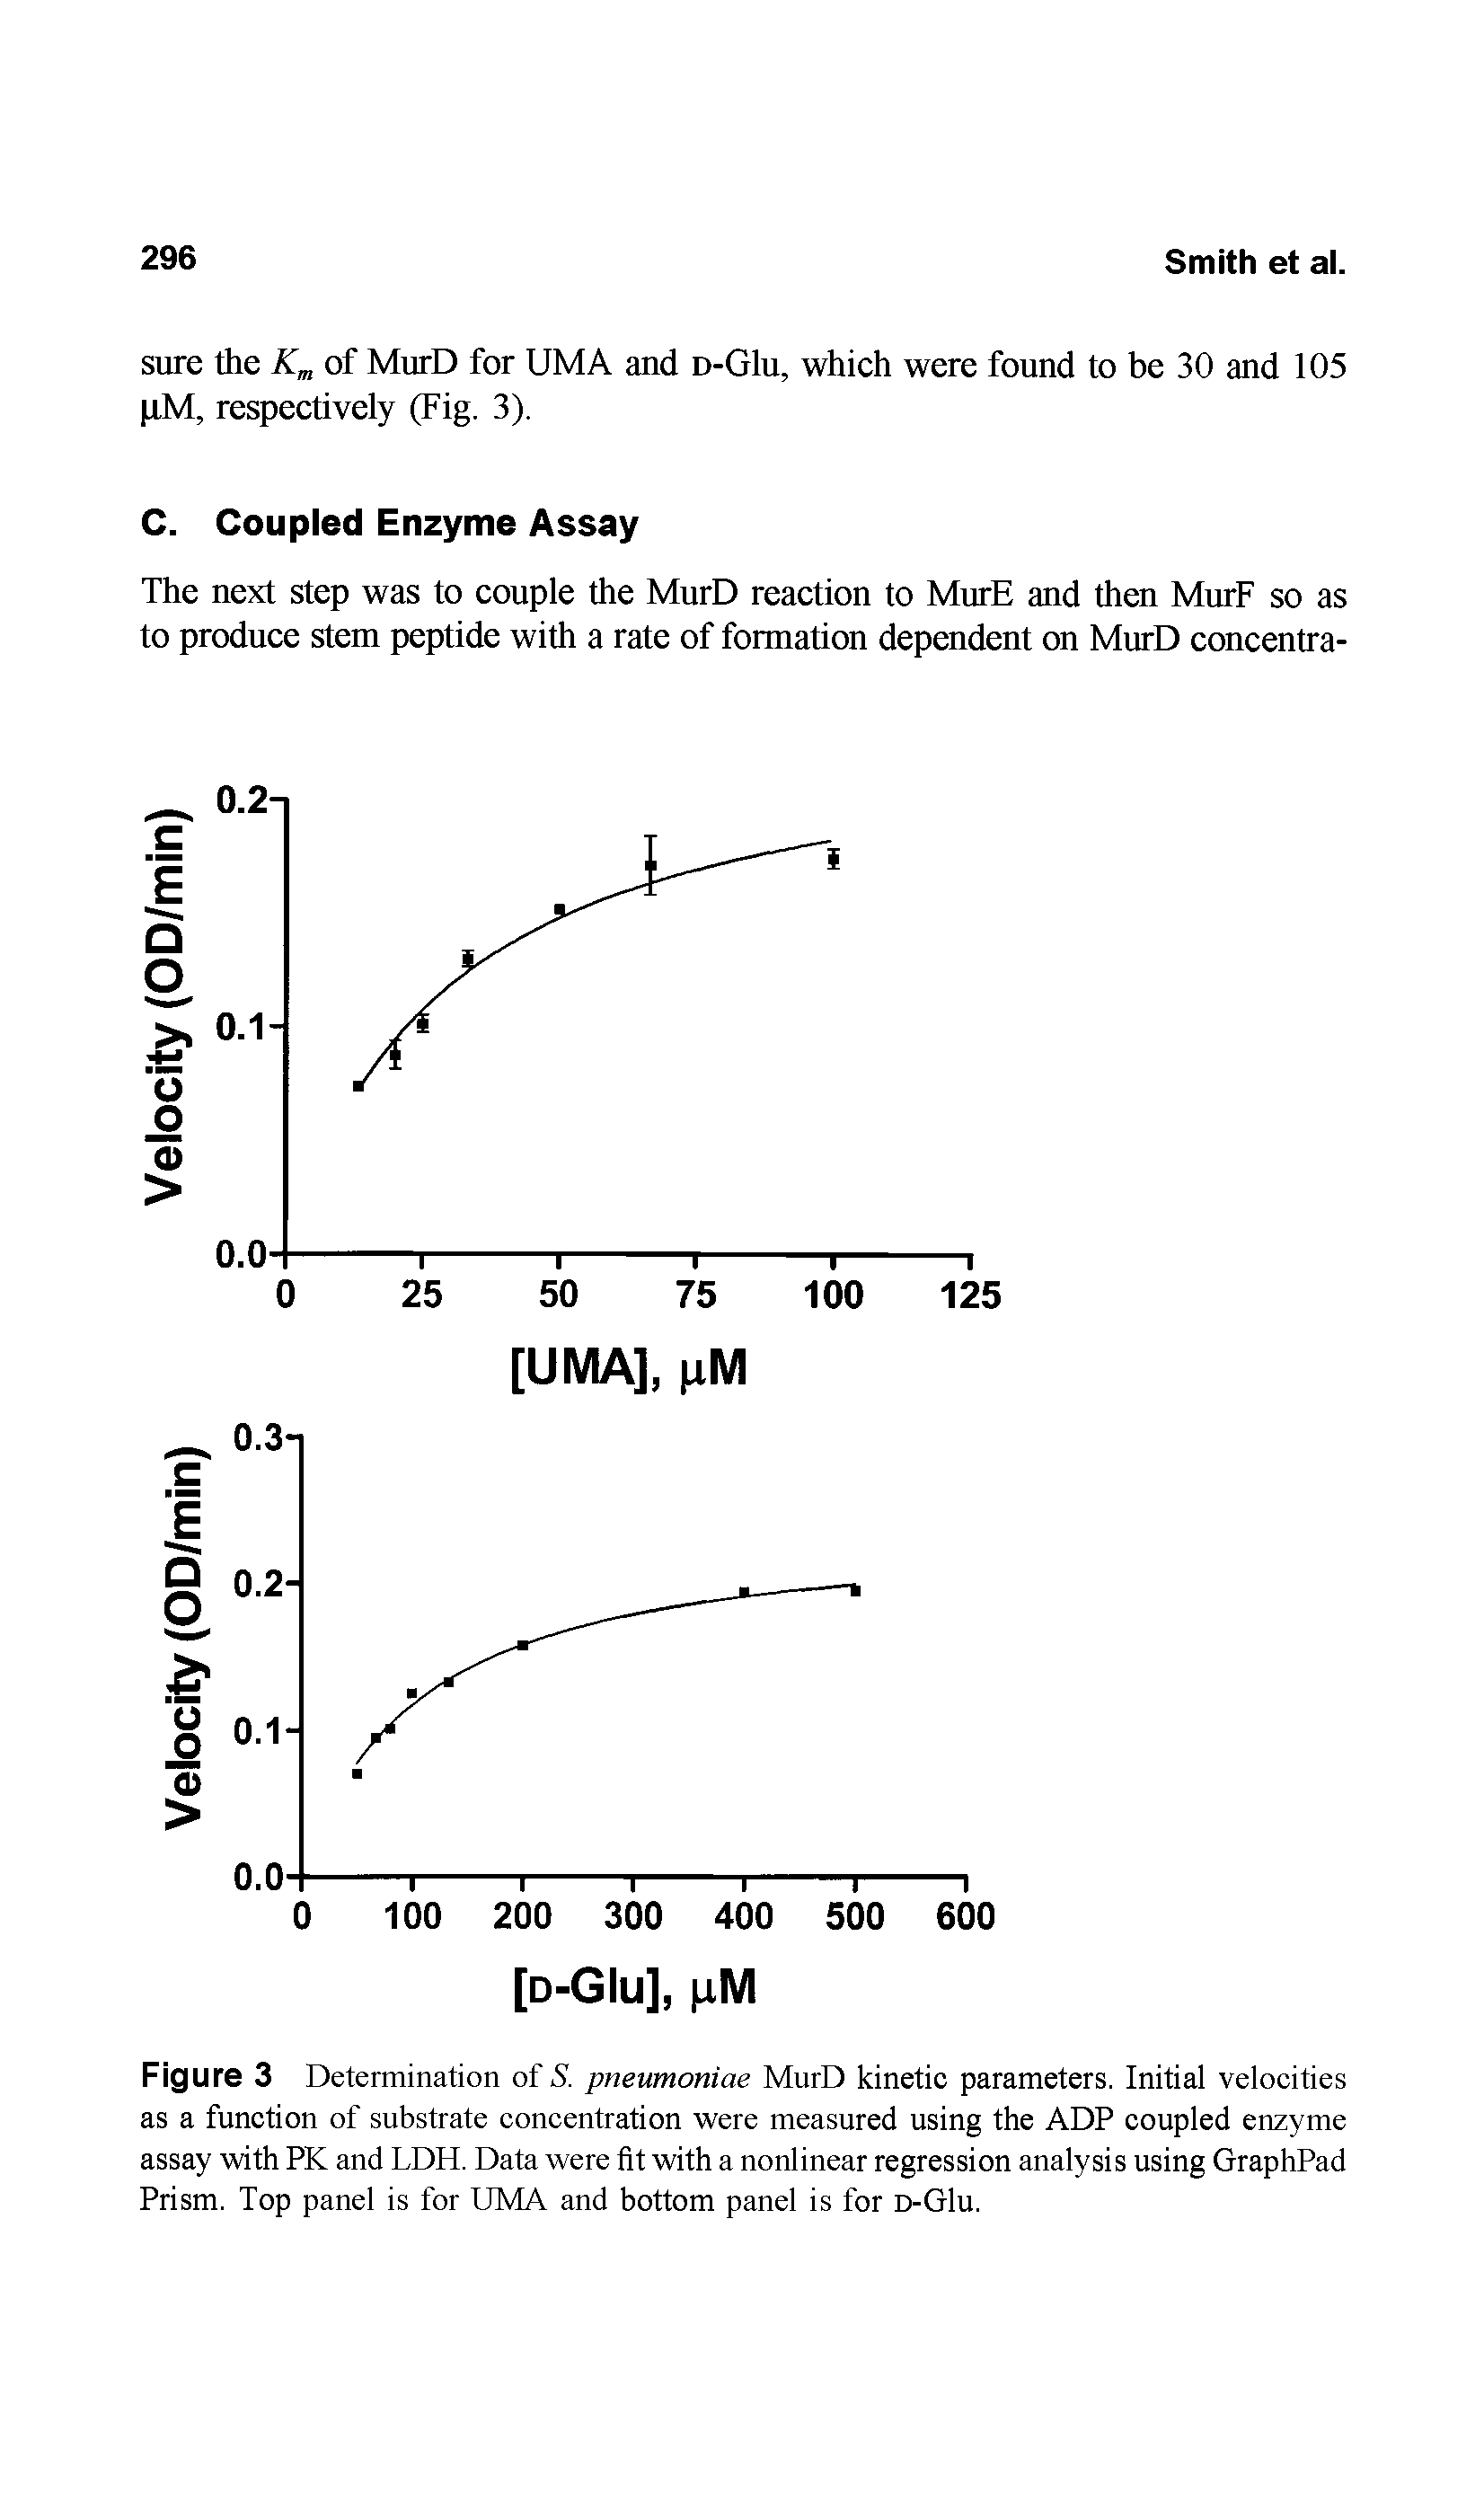 Figure 3 Determination of S. pneumoniae MurD kinetic parameters. Initial velocities as a function of substrate concentration were measured using the ADP coupled enzyme assay with PK and LDH. Data were fit with a nonlinear regression analysis using GraphPad Prism. Top panel is for UMA and bottom panel is for d-G1u.